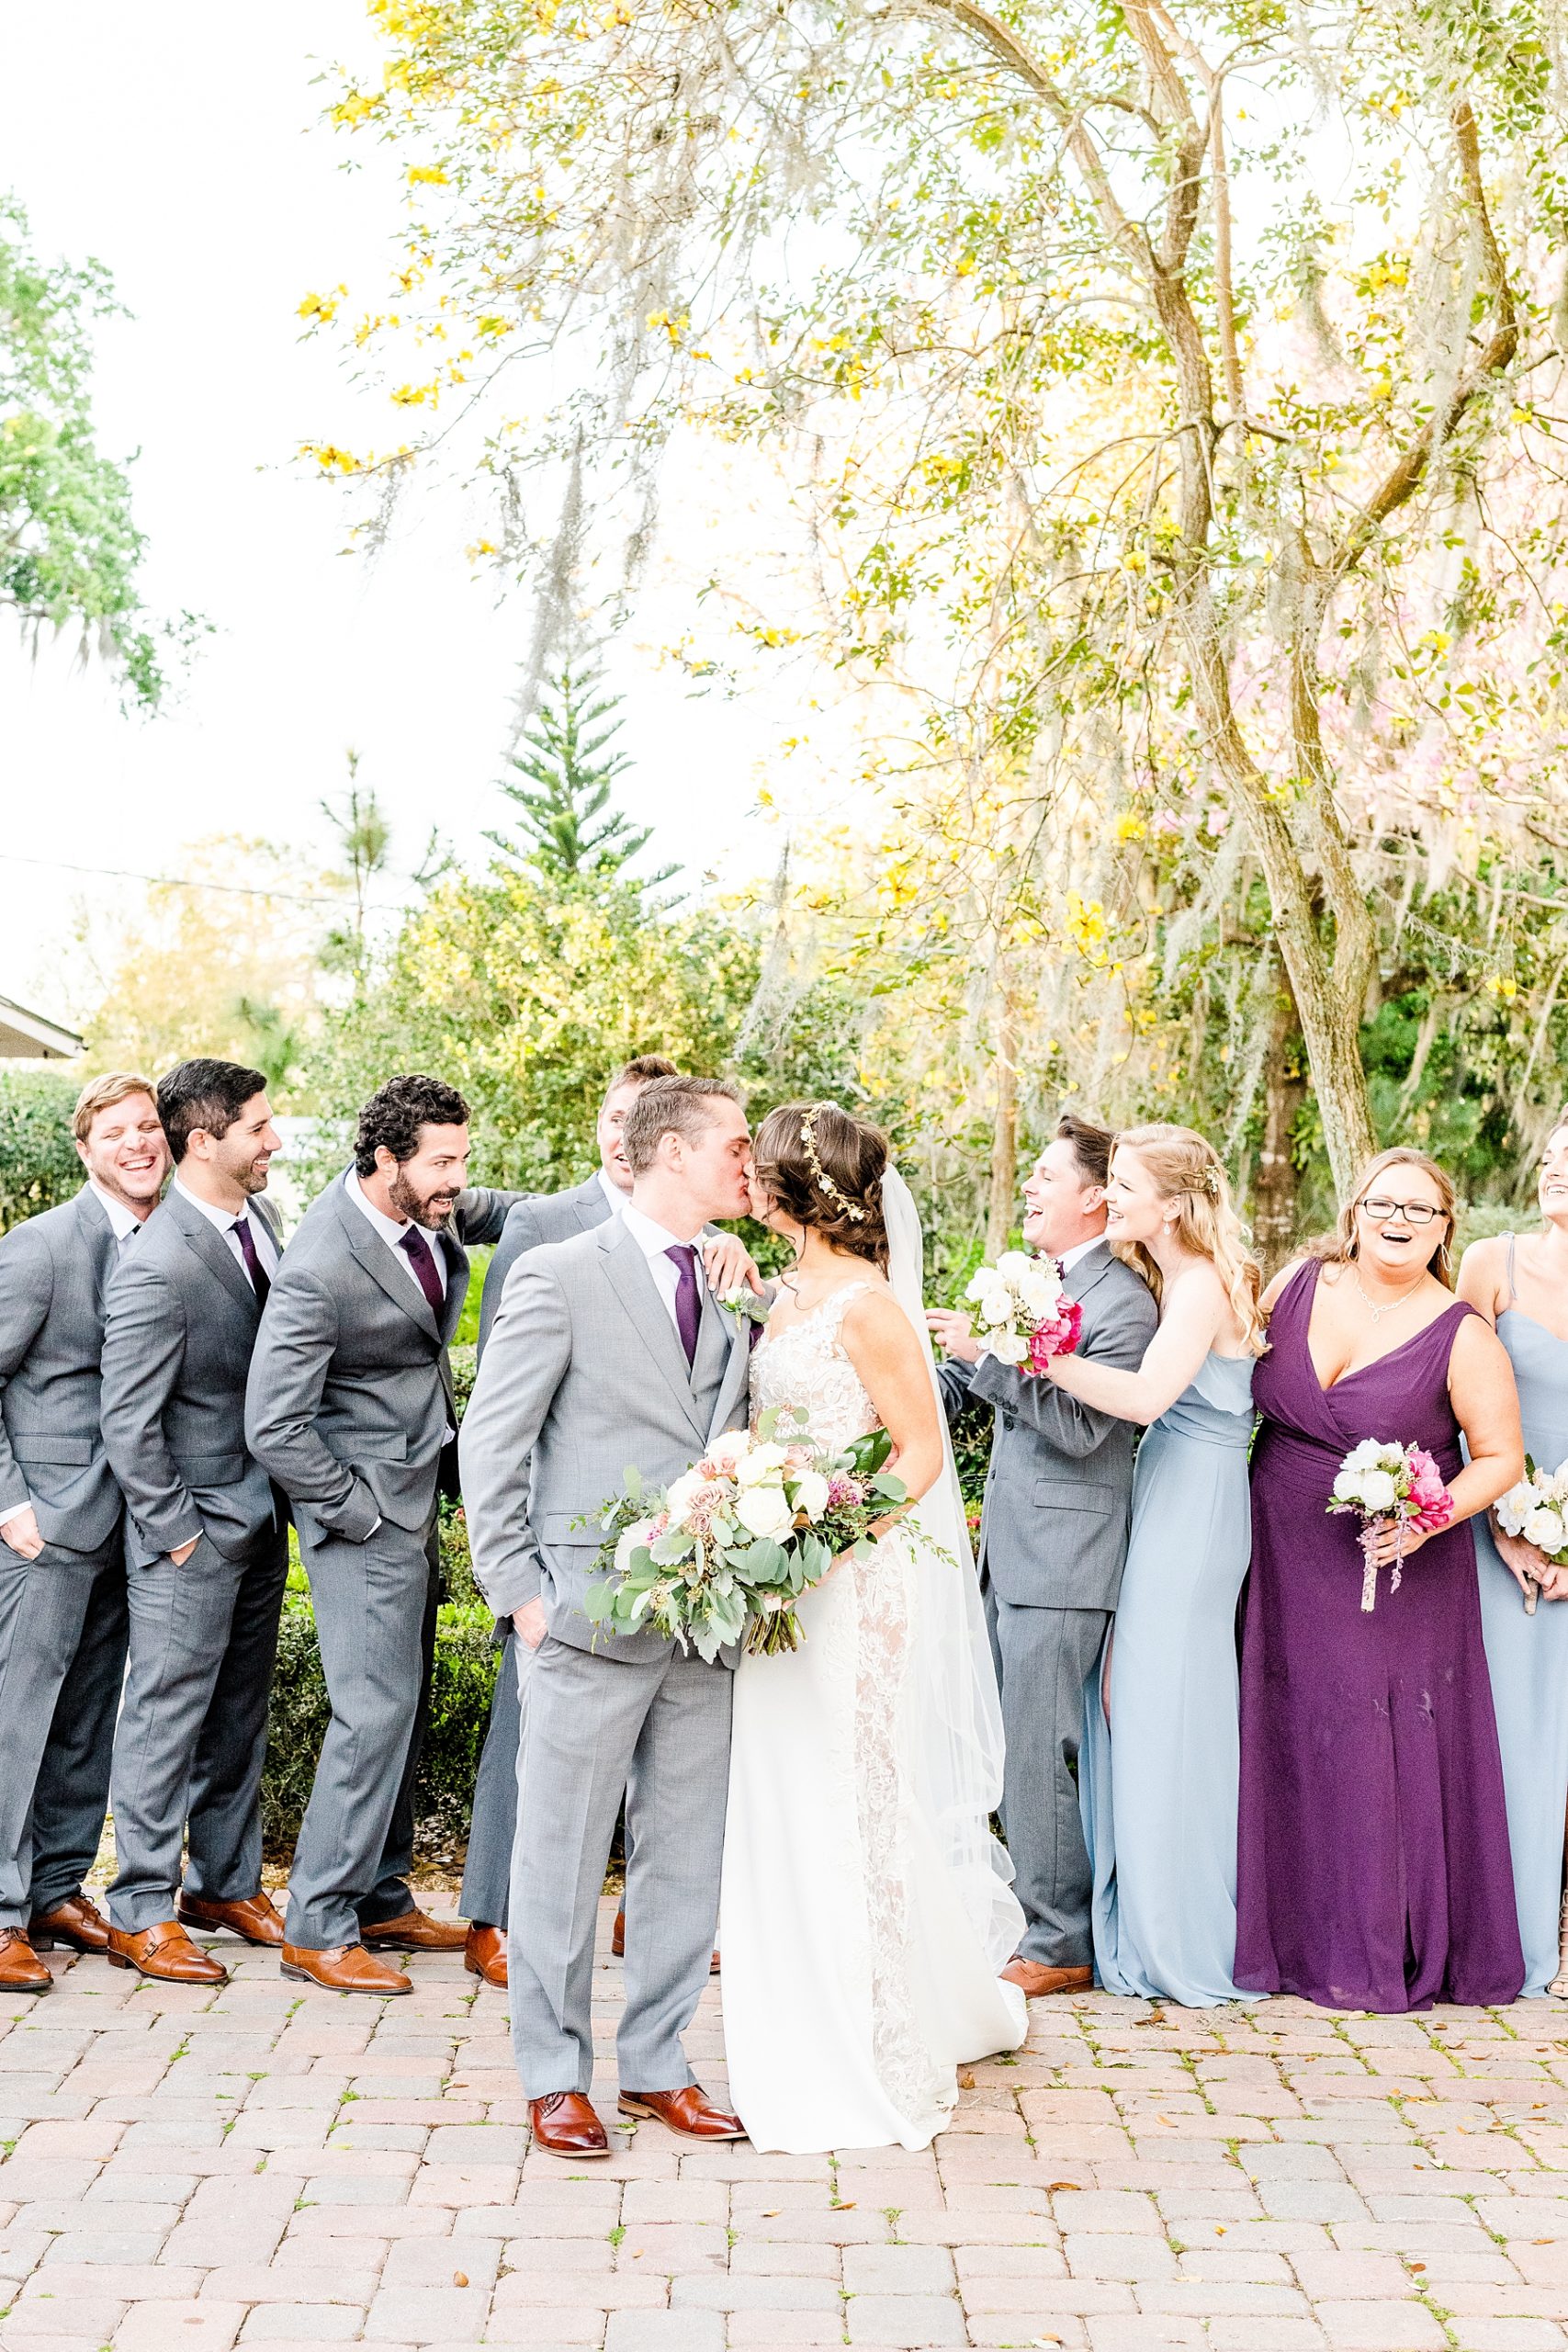 Bridal Party | Town Manor | Chynna Pacheco Photography